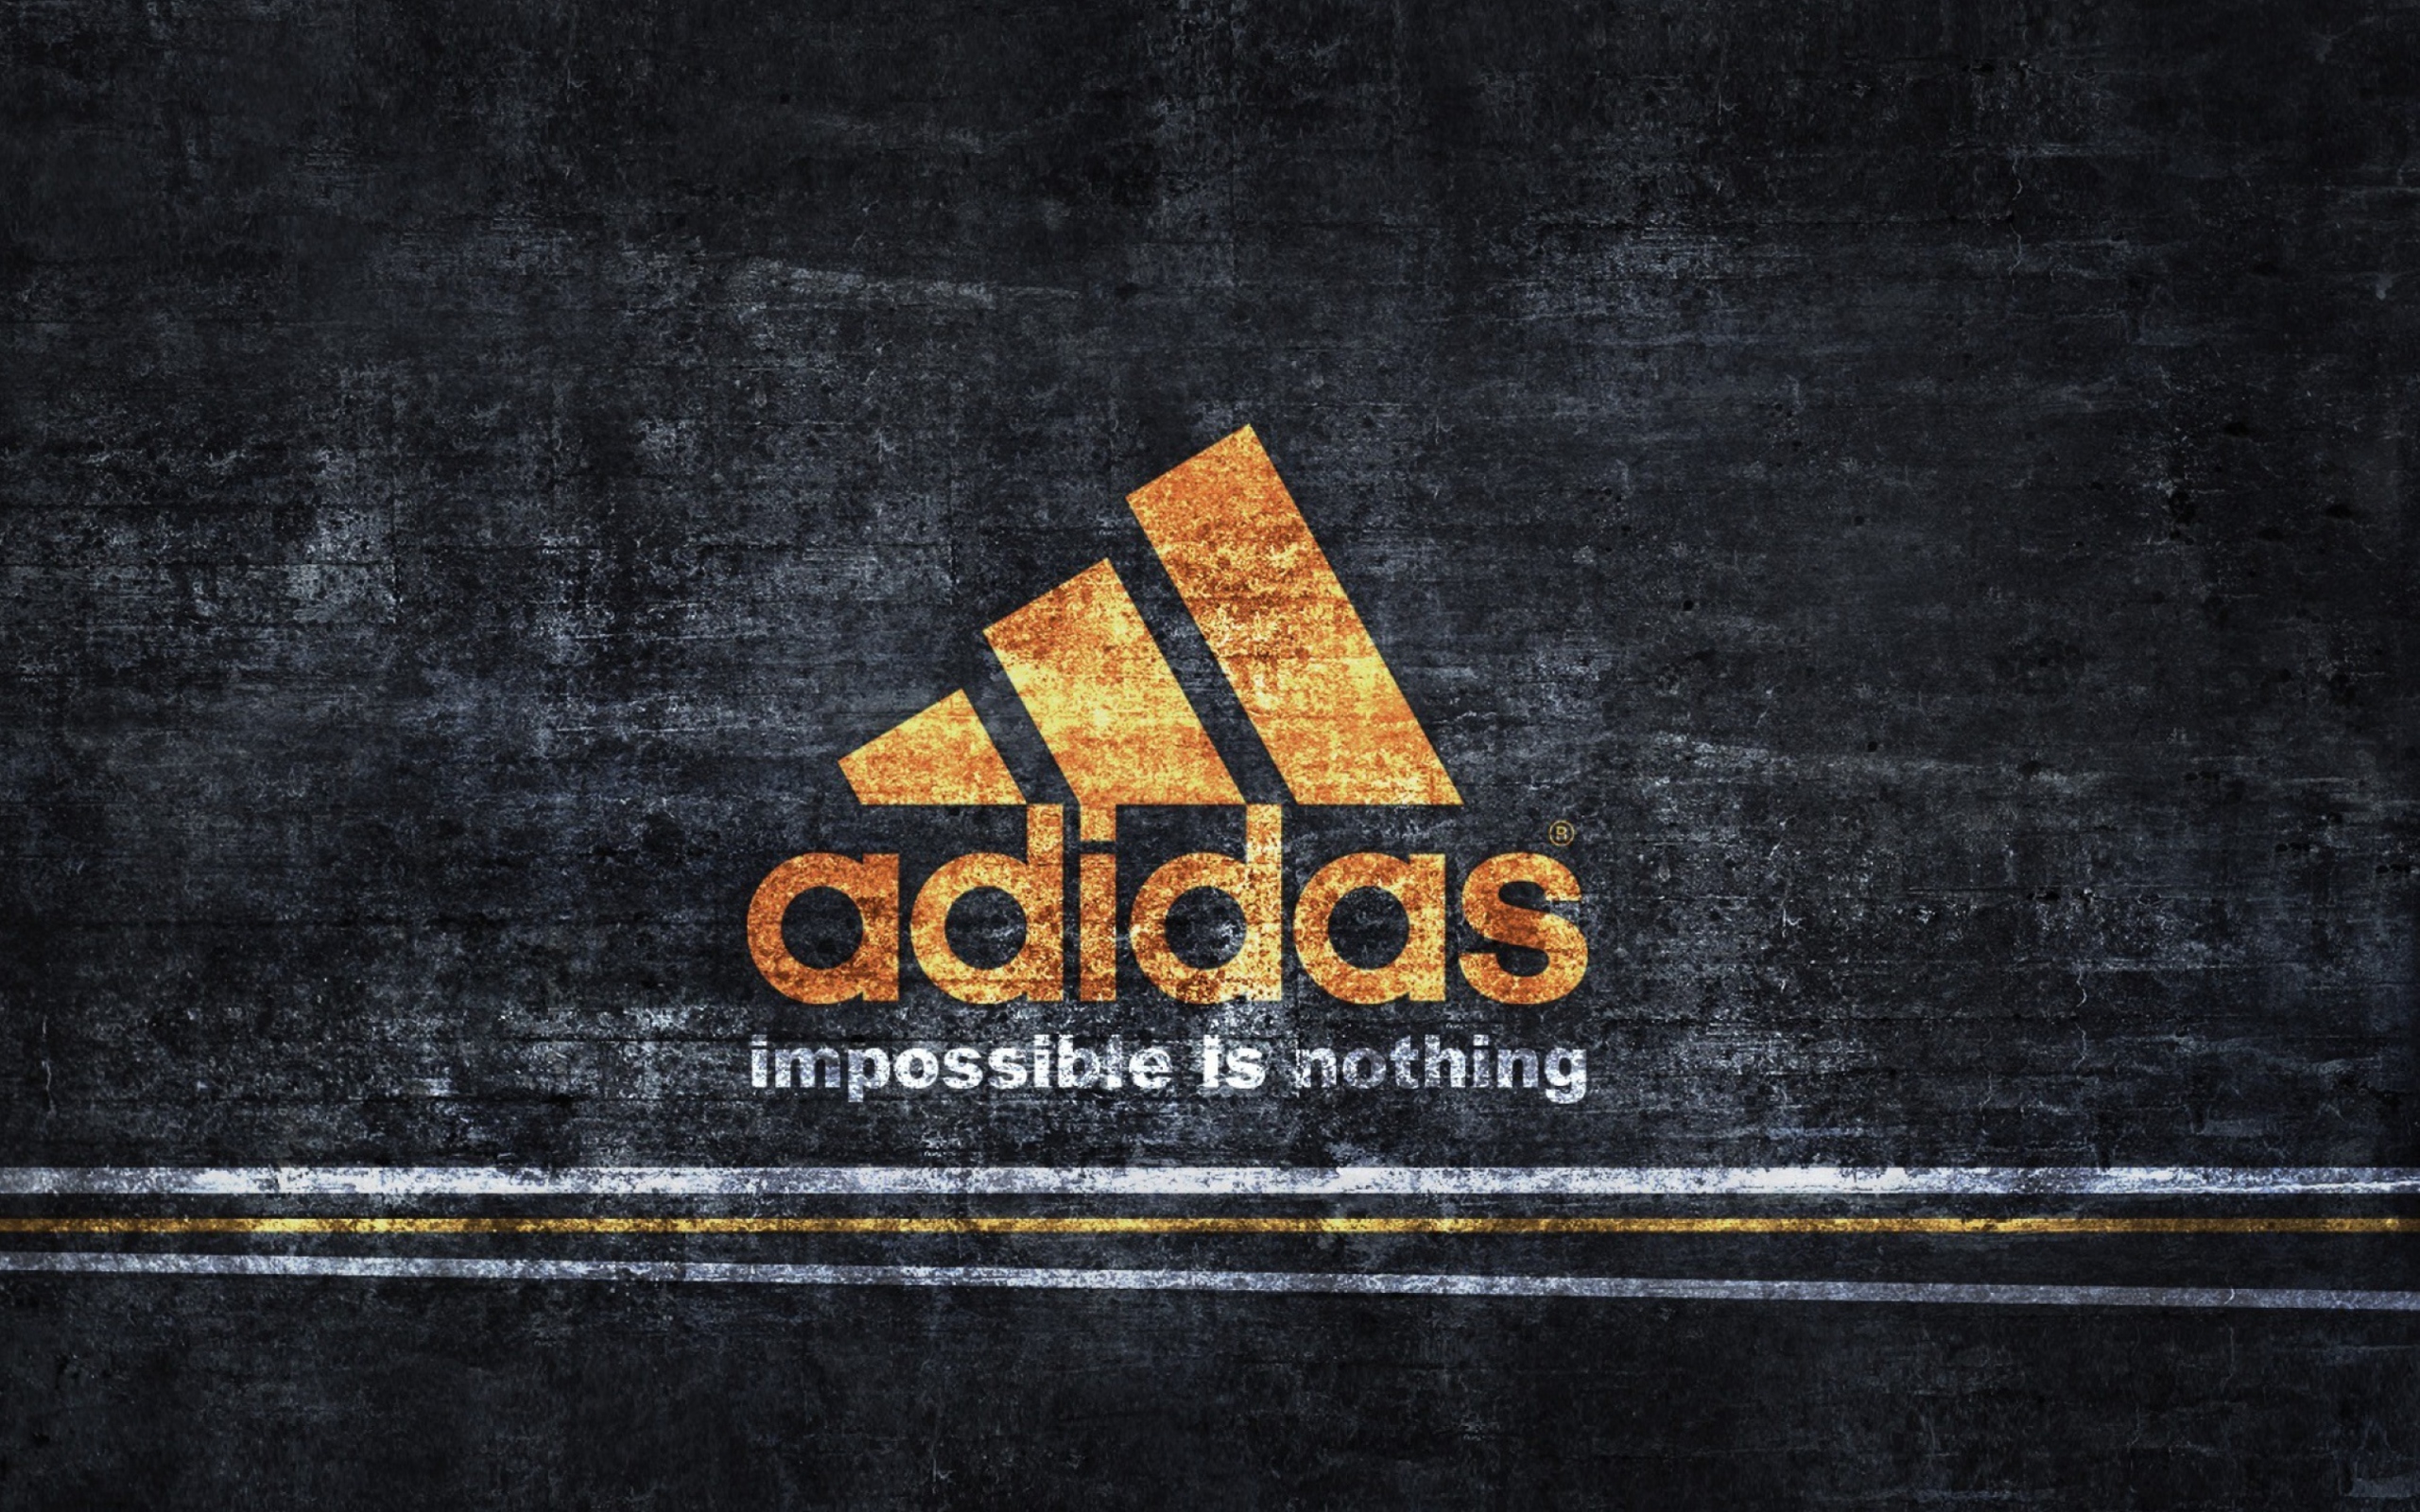 Adidas – Impossible is Nothing screenshot #1 2560x1600